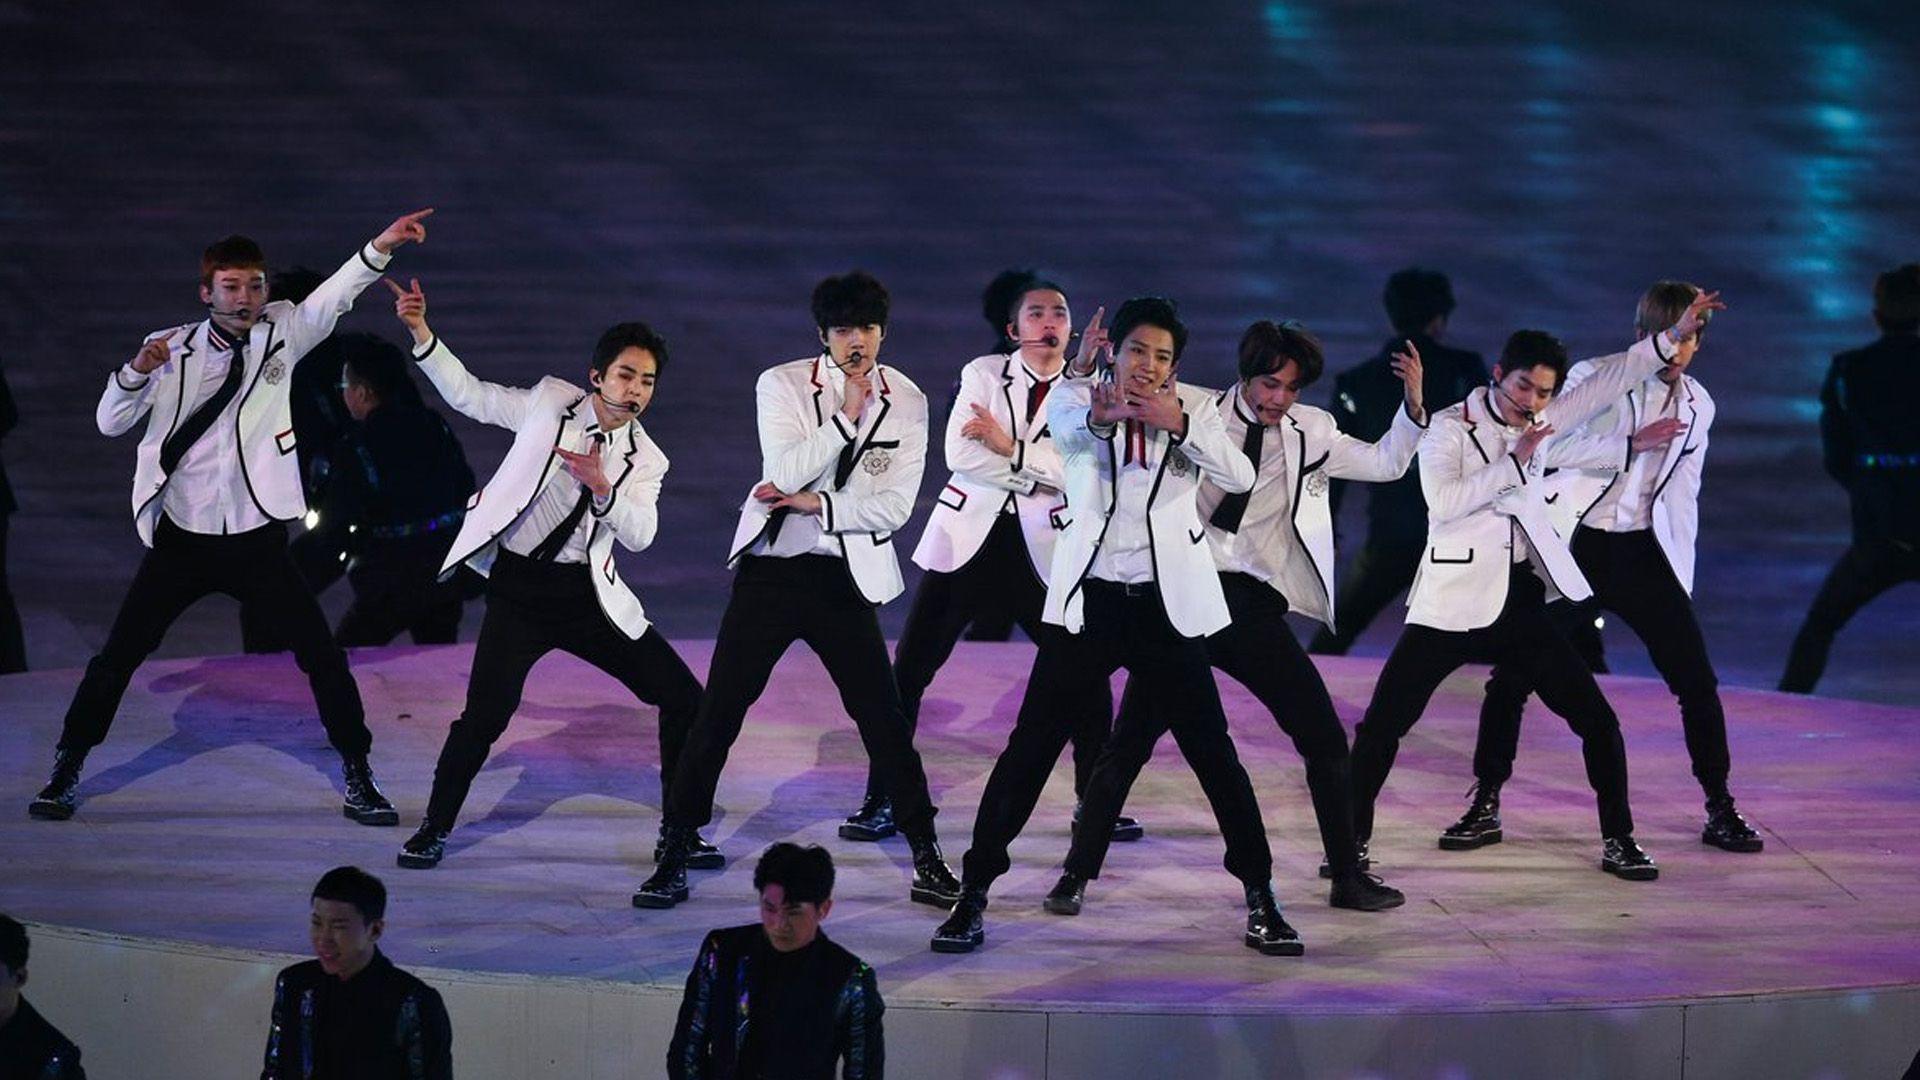 Kings Of K Pop EXO Outstanding Performance At Winter Olympics 2018